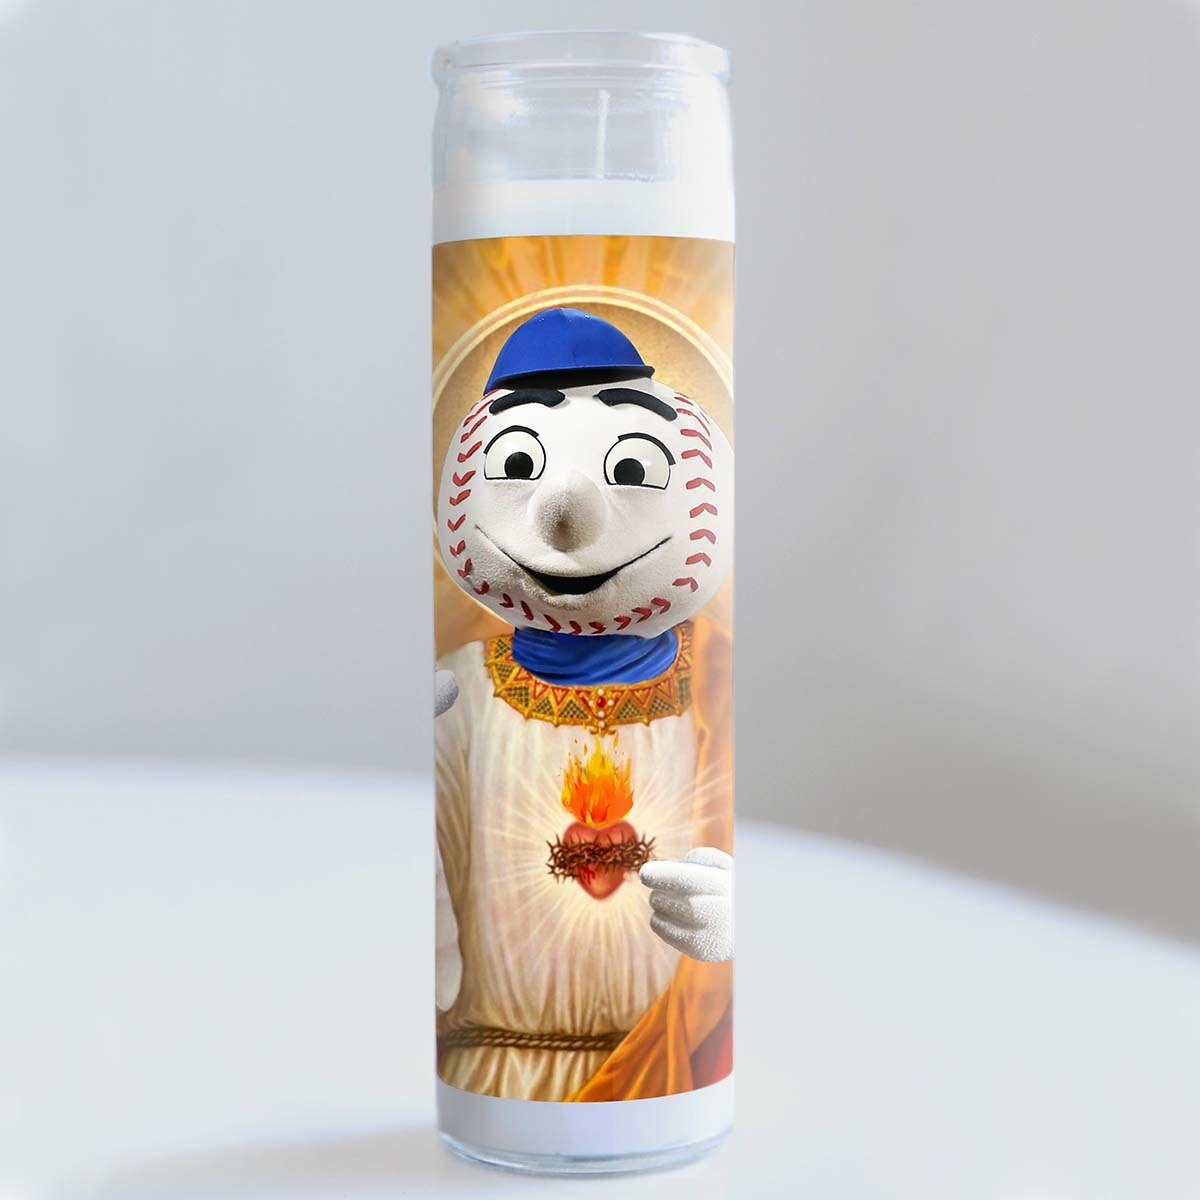 The candle with Mr Met dressed as a saint